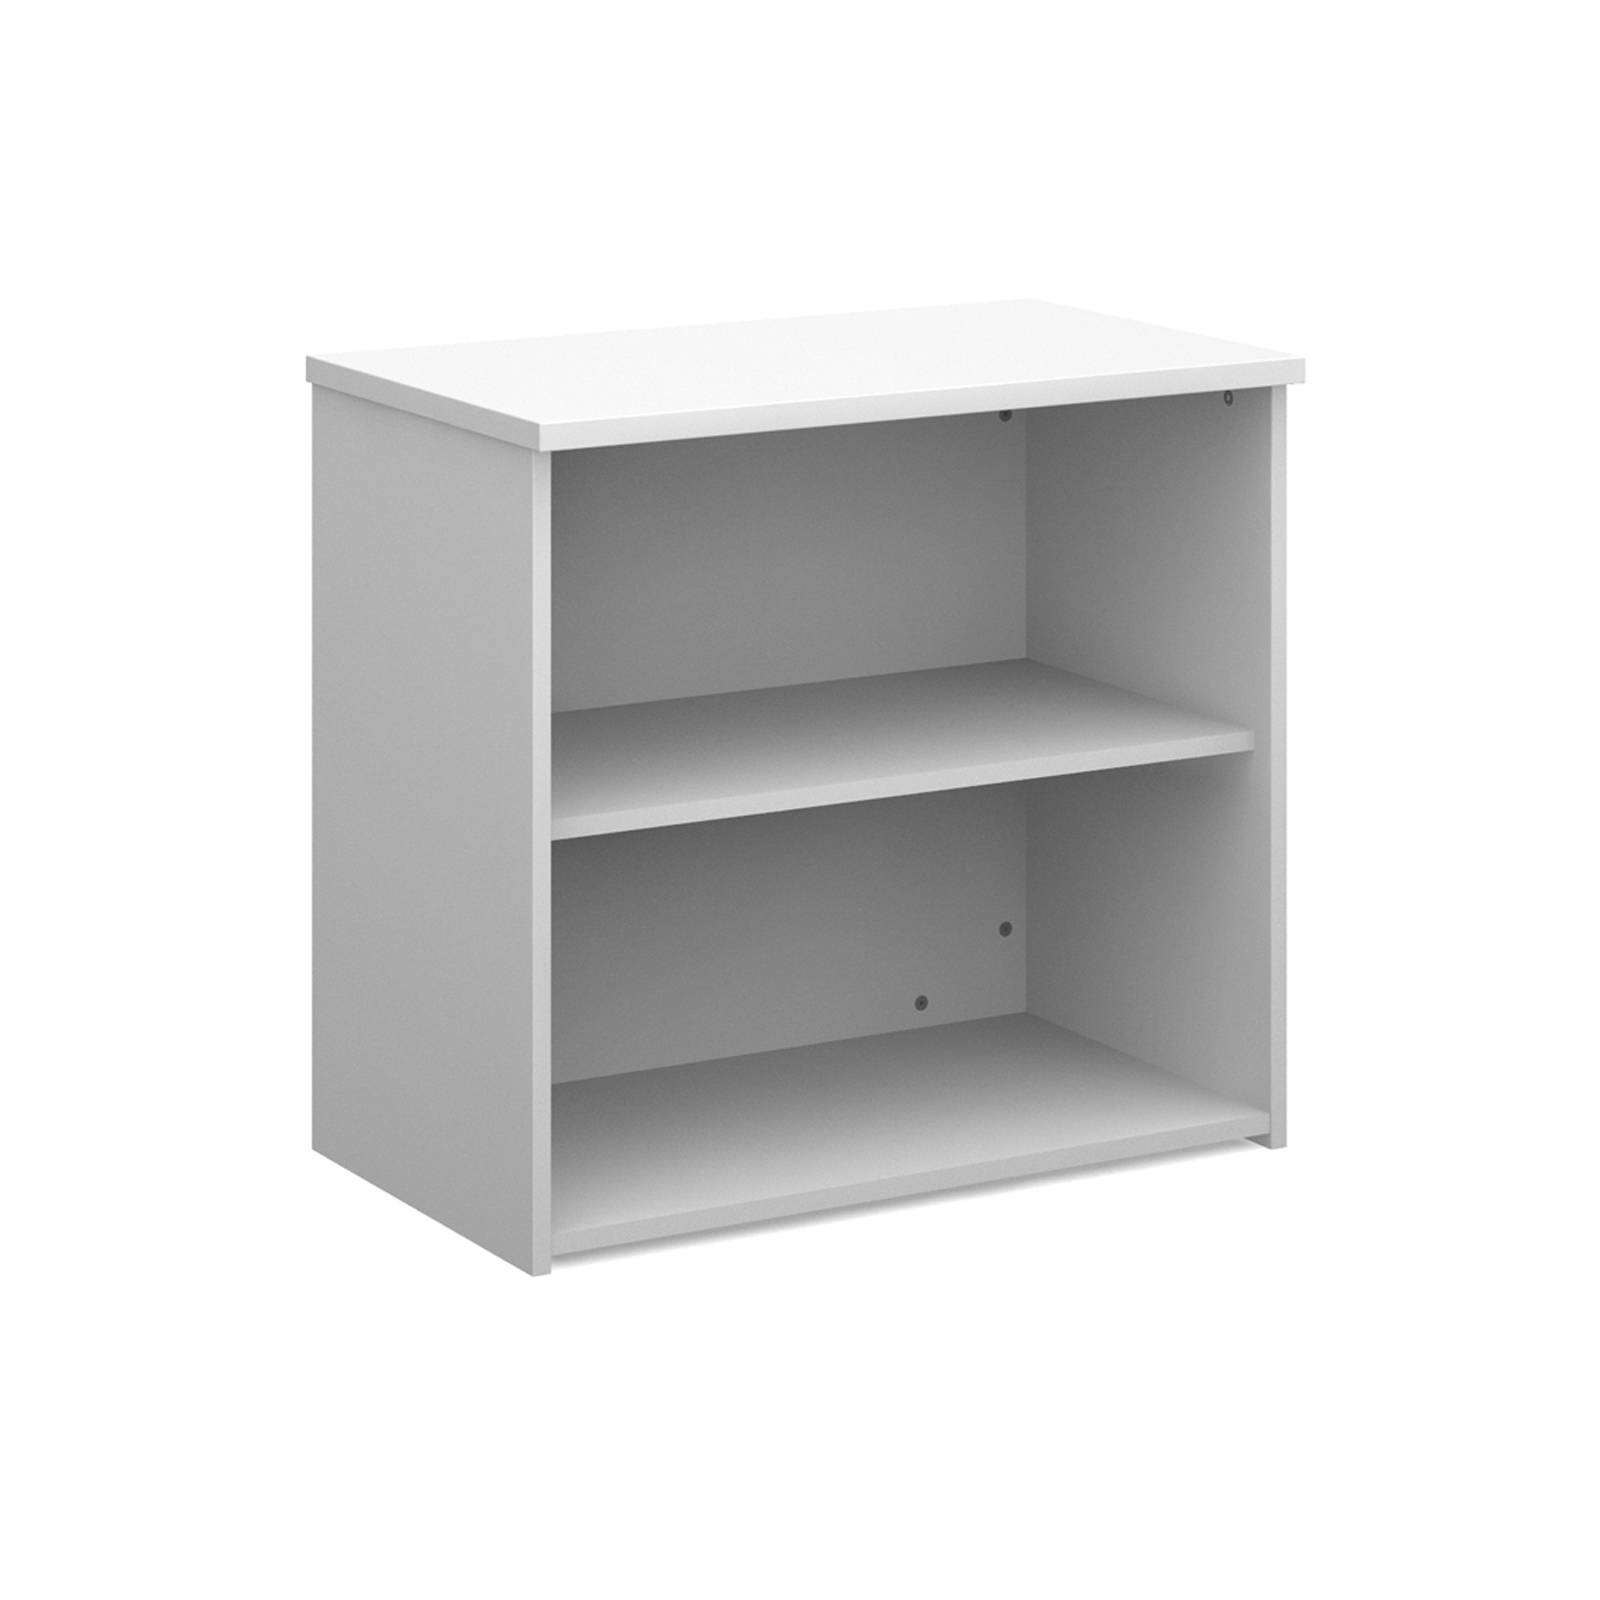 Up To 1200mm High Universal bookcase 740mm high with 1 shelf - white